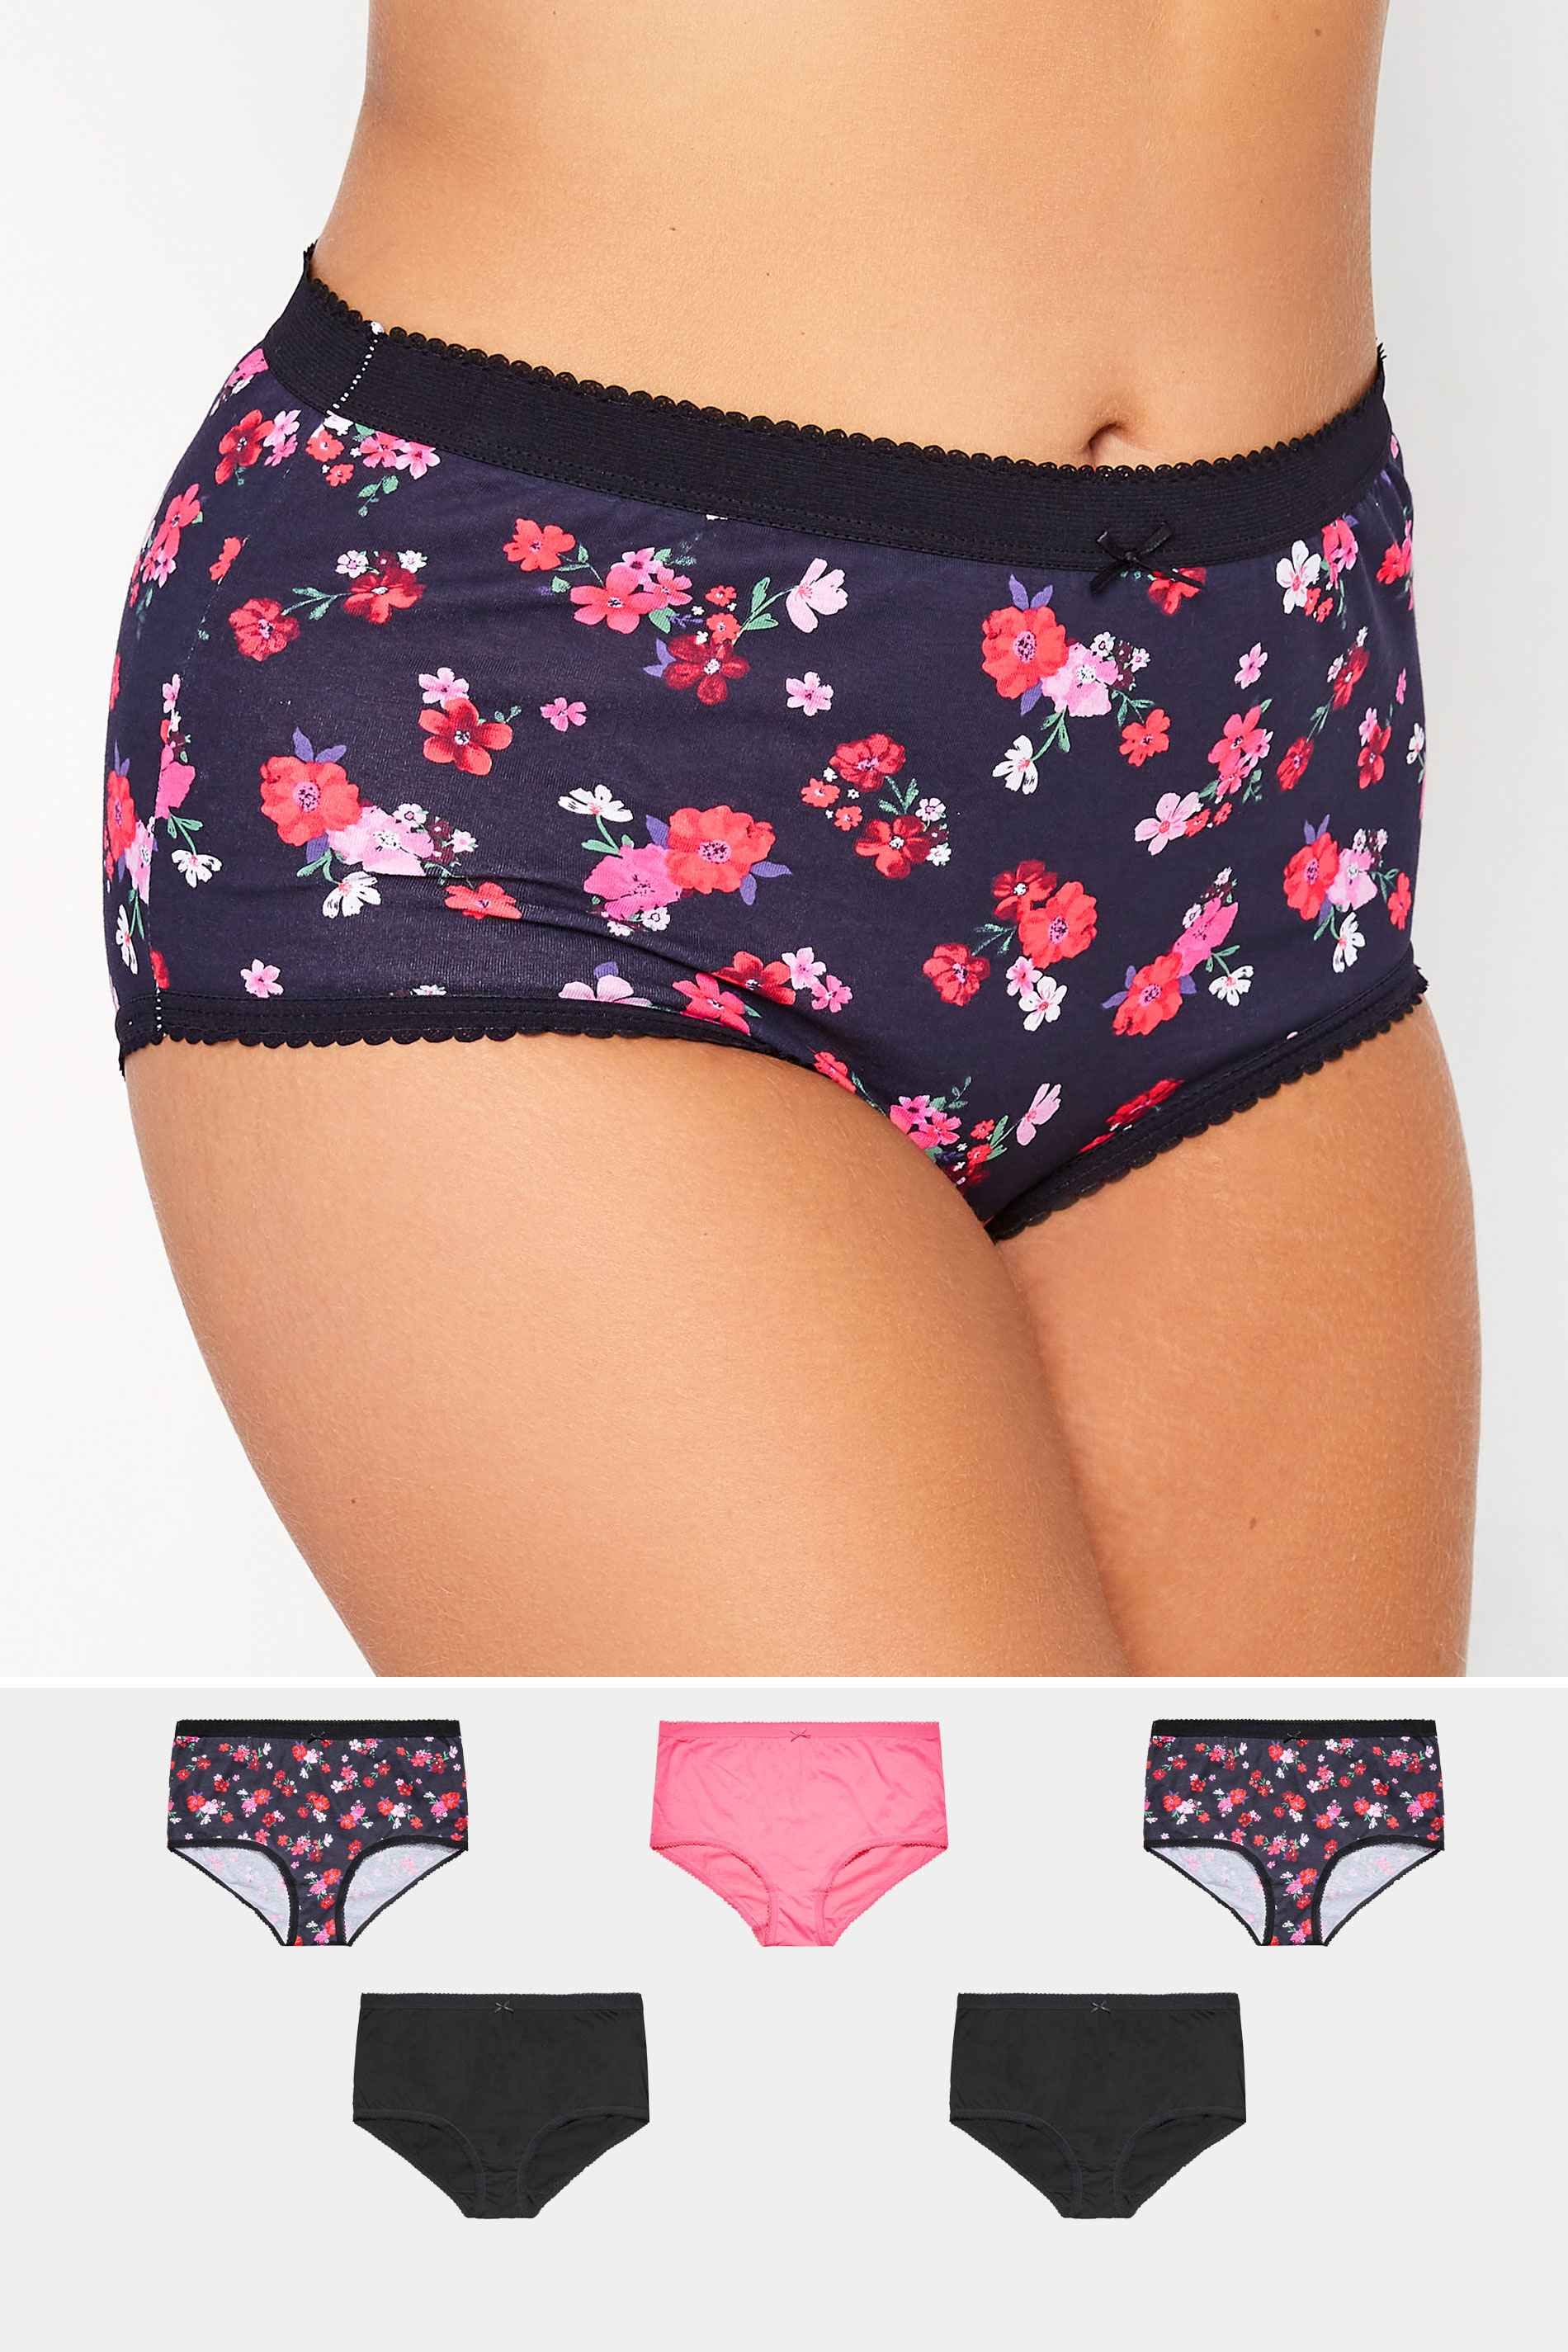 5 PACK Curve Pink & Black Autumn Floral Print High Waisted Full Briefs 1